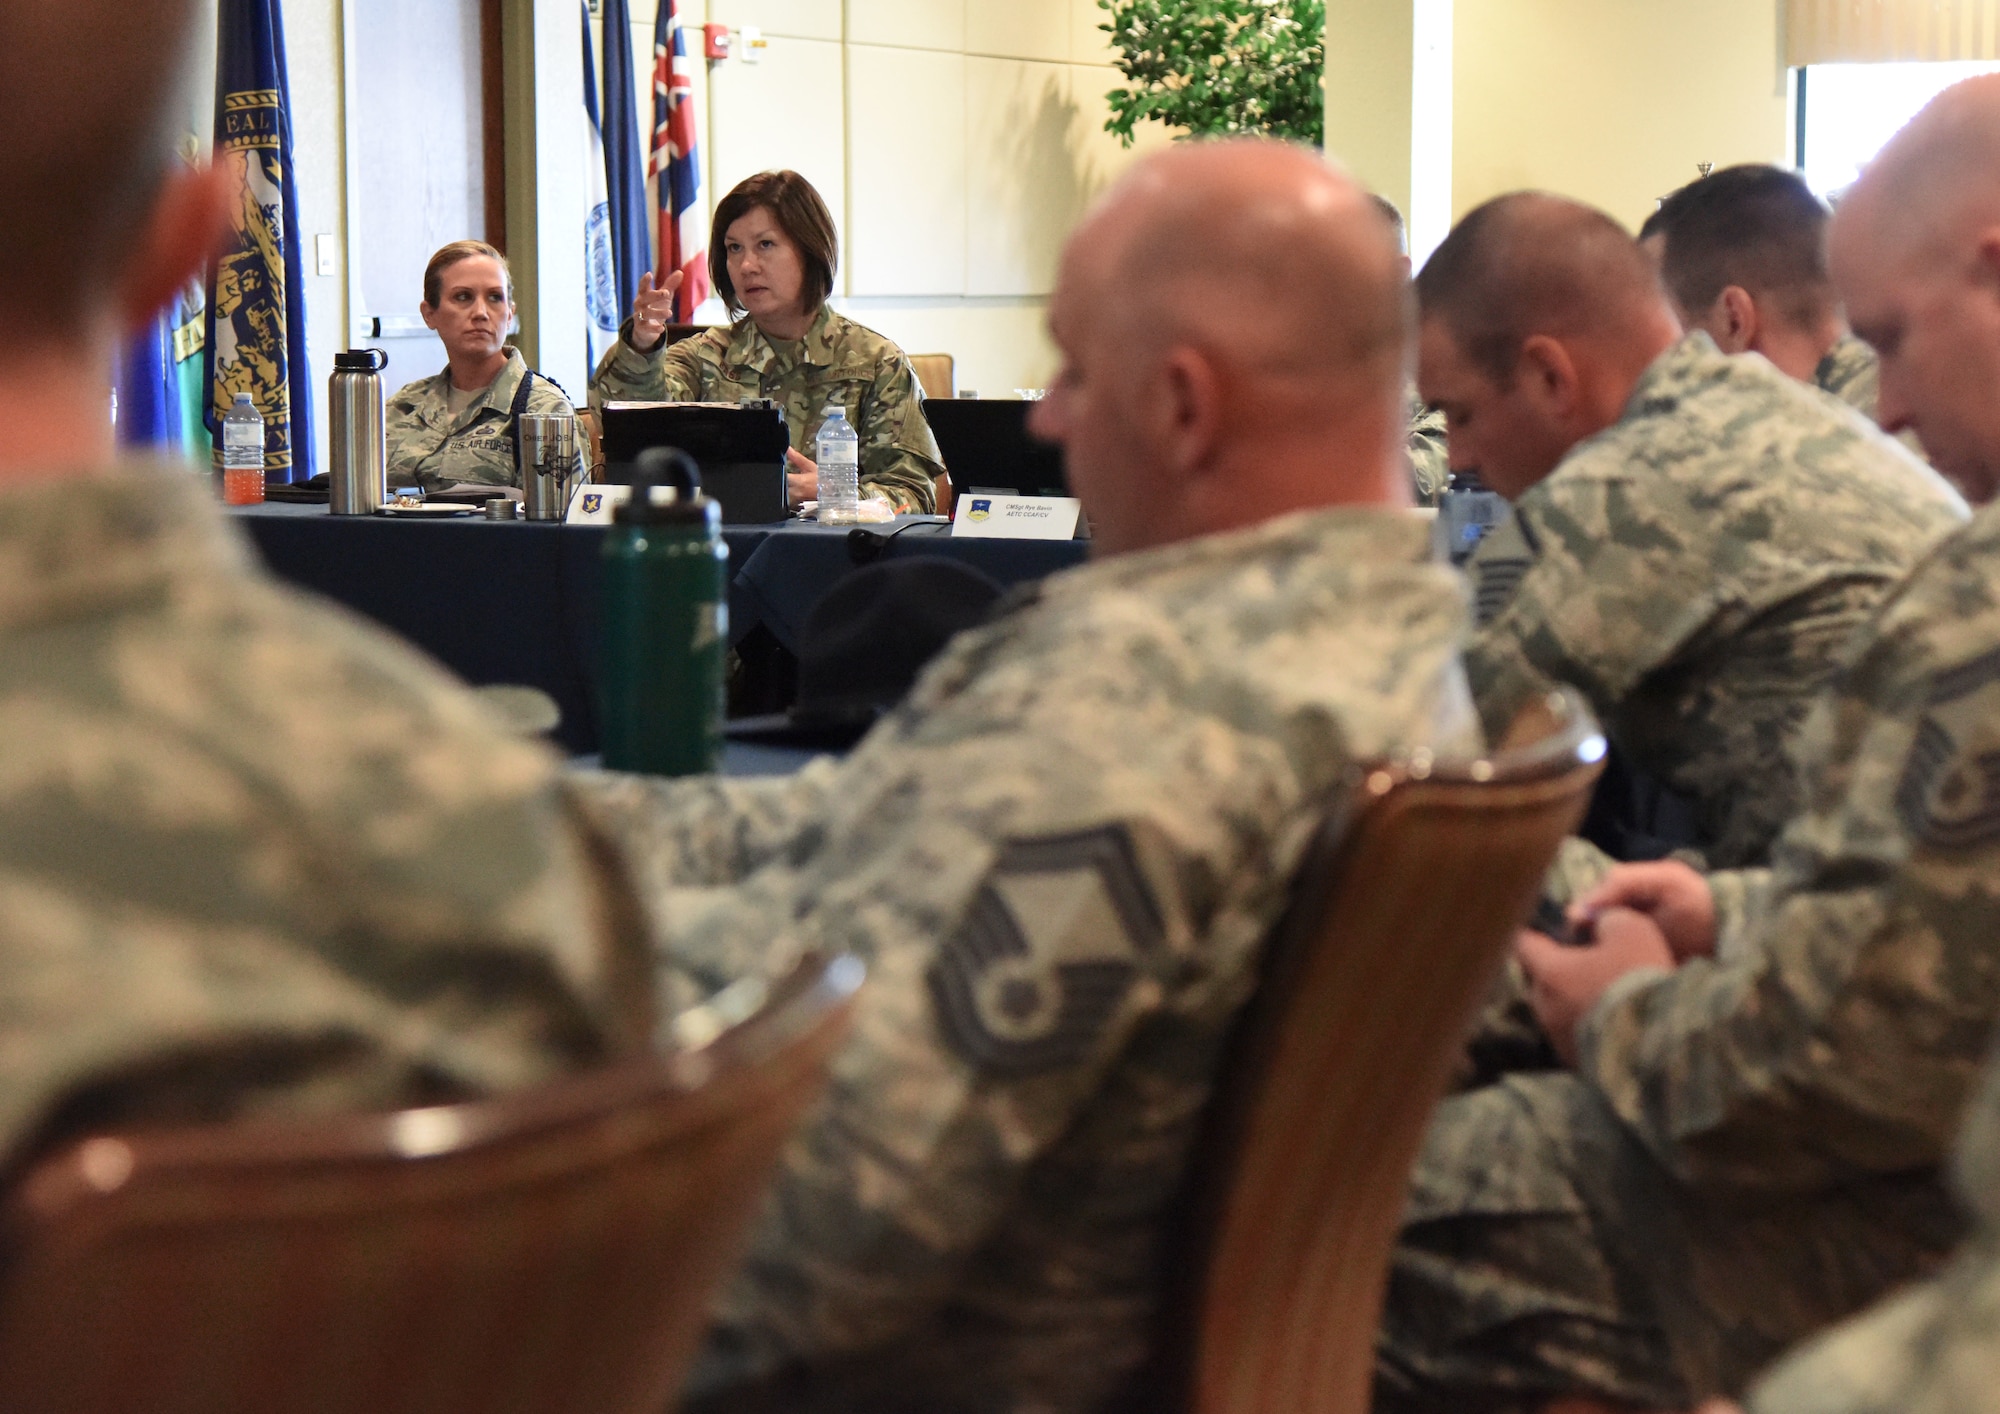 U.S. Air Force Chief Master Sgt. JoAnne Bass, 2nd Air Force command chief, engages in a discussion with attendees during the 2nd Air Force Training Group Superintendent Summit at Keesler Air Force Base, Mississippi, Oct. 30, 2018. The two-day summit allowed training group senior enlisted leaders to share their missions and identify challenges and best practices that could be implemented throughout the command. (U.S. Air Force photo by Kemberly Groue)